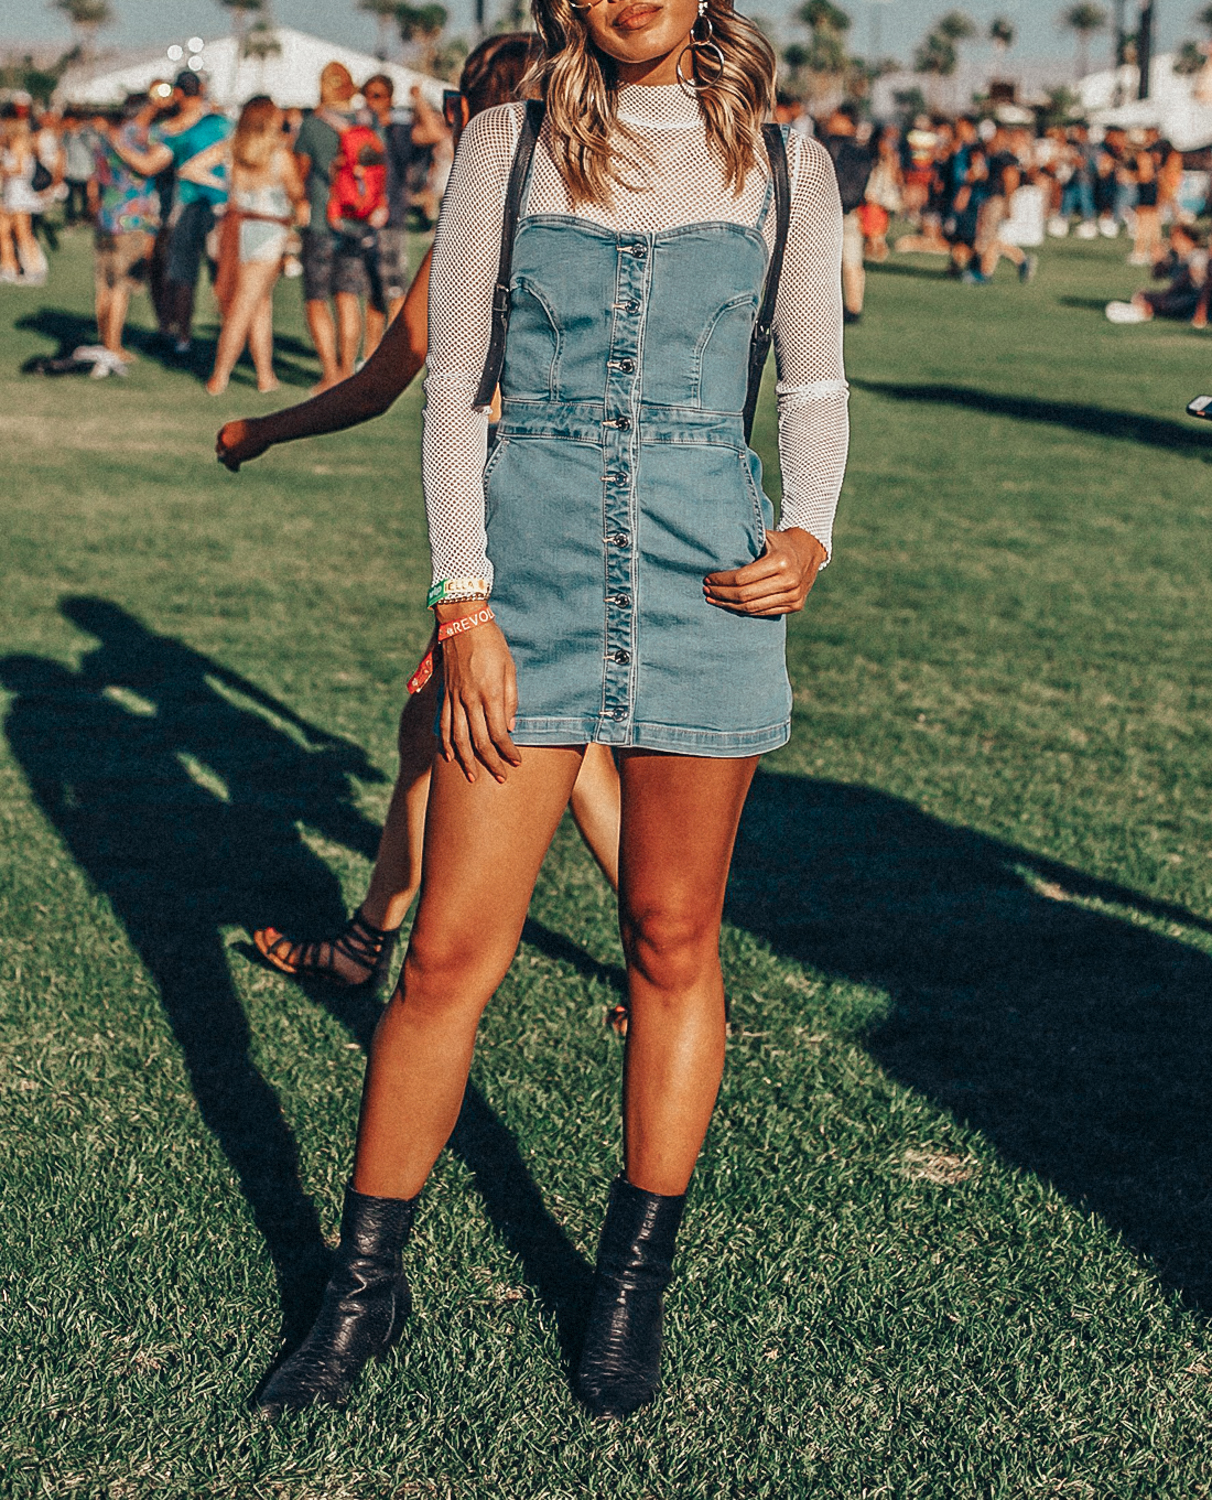 13 Fabulous Festival Outfit Ideas Guaranteed to Inspire | See Want Shop1212 x 1500